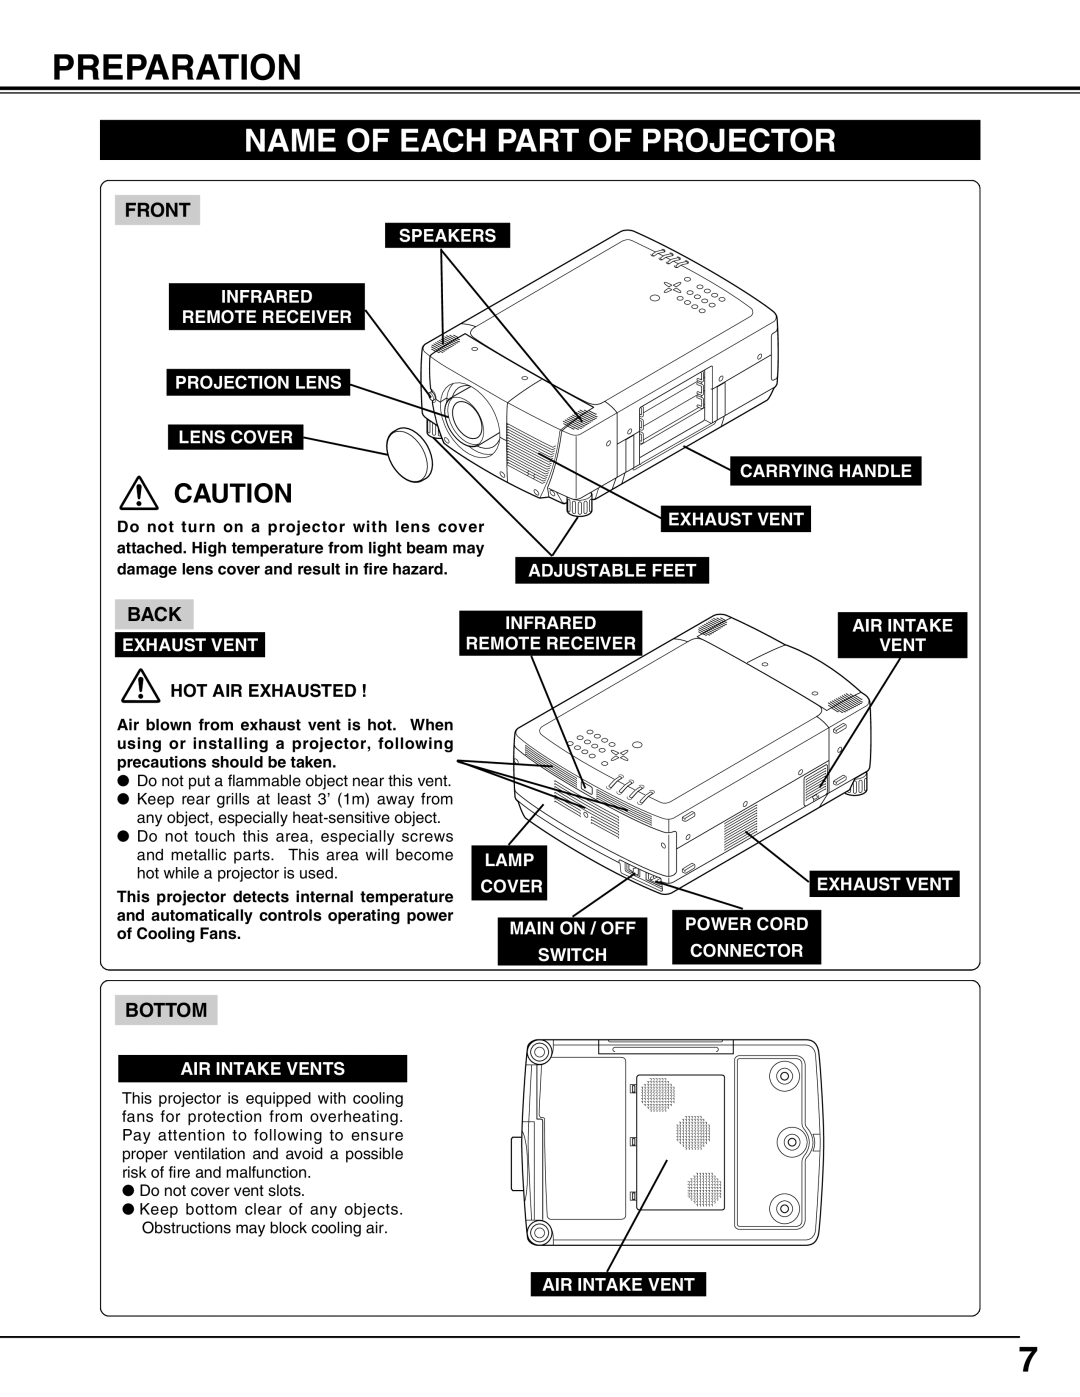 Christie Digital Systems 38-MX2001-01 user manual Preparation, Name Of Each Part Of Projector, Front, Back, Bottom 